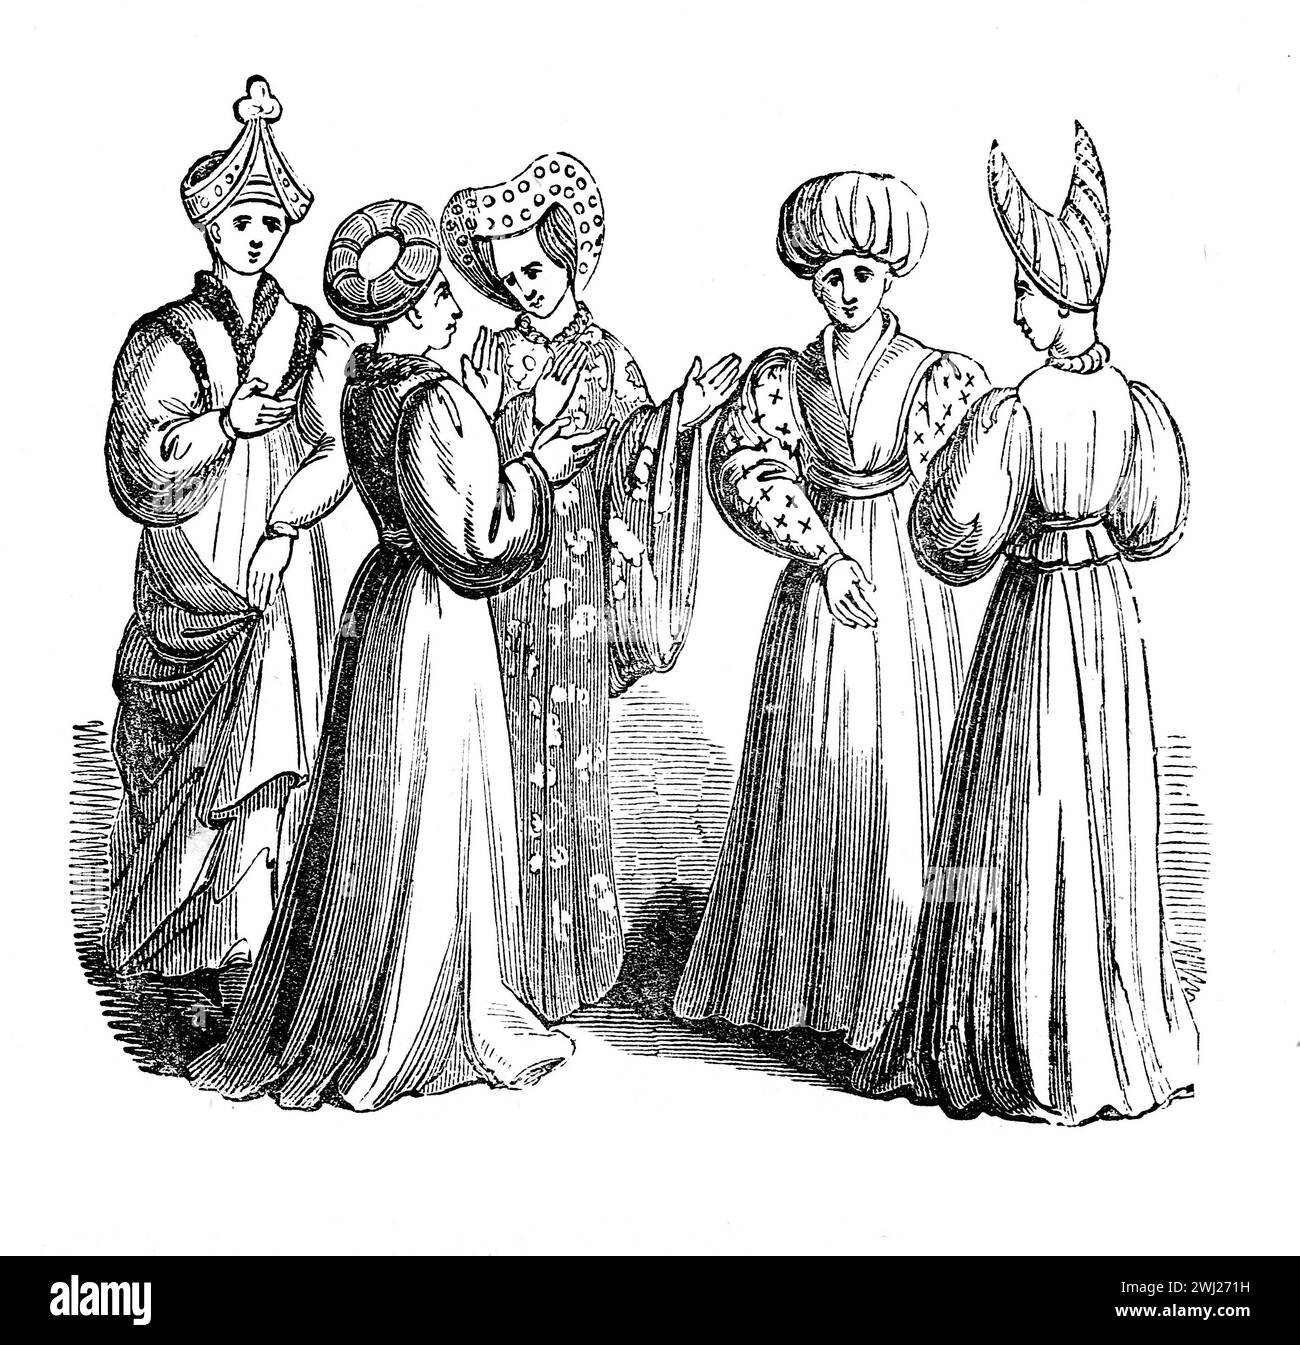 Female costumes in the time of Henry VI of England. Black and White Illustration from the "Old England" published by James Sangster in 1860. Stock Photo